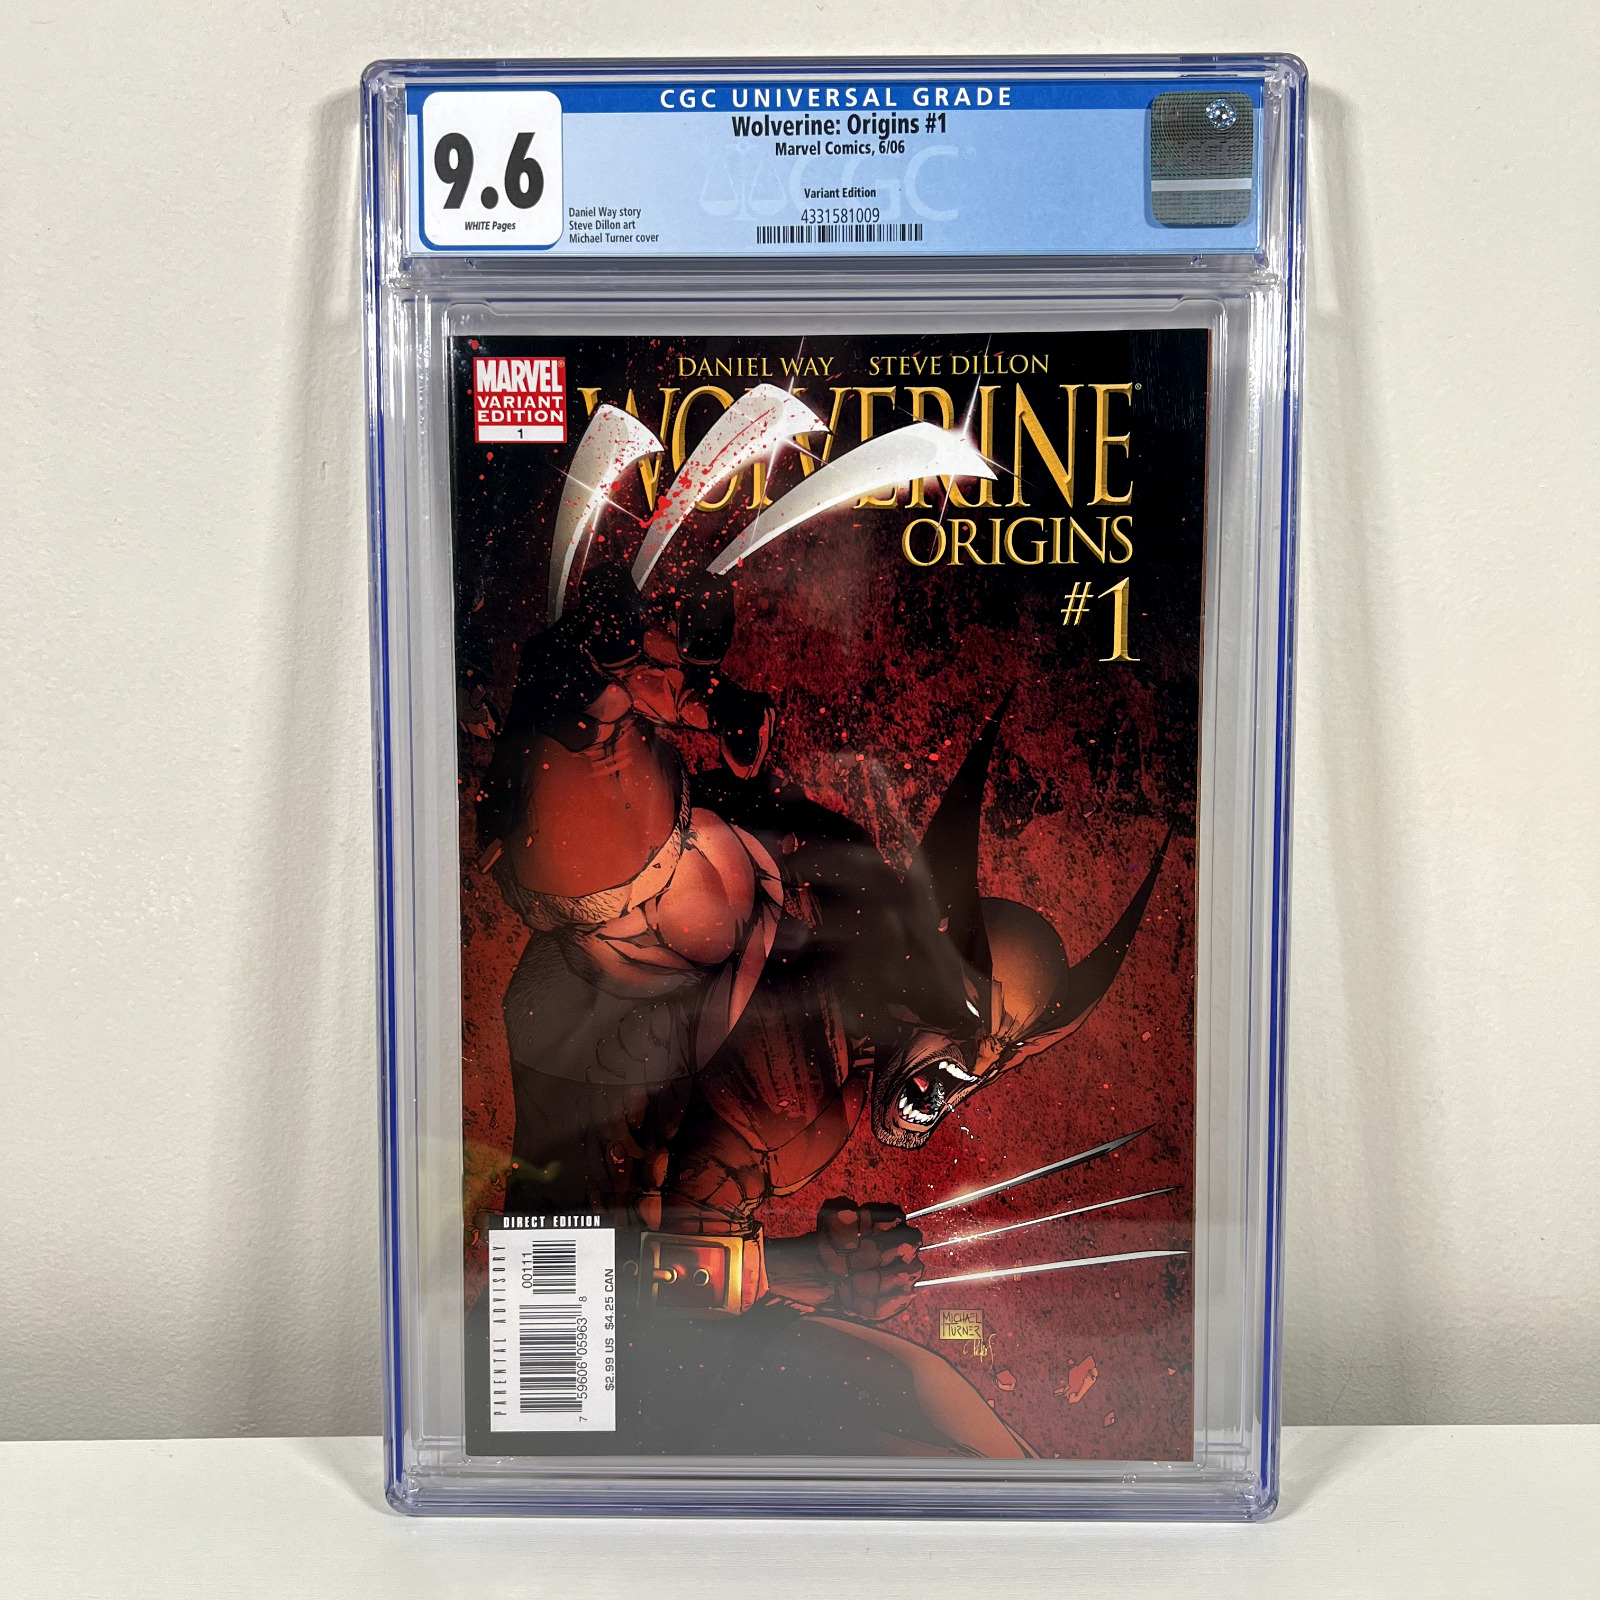 Wolverine Origins #1 CGC 9.6 White Pages Turner Variant Cover from Marvel Comics